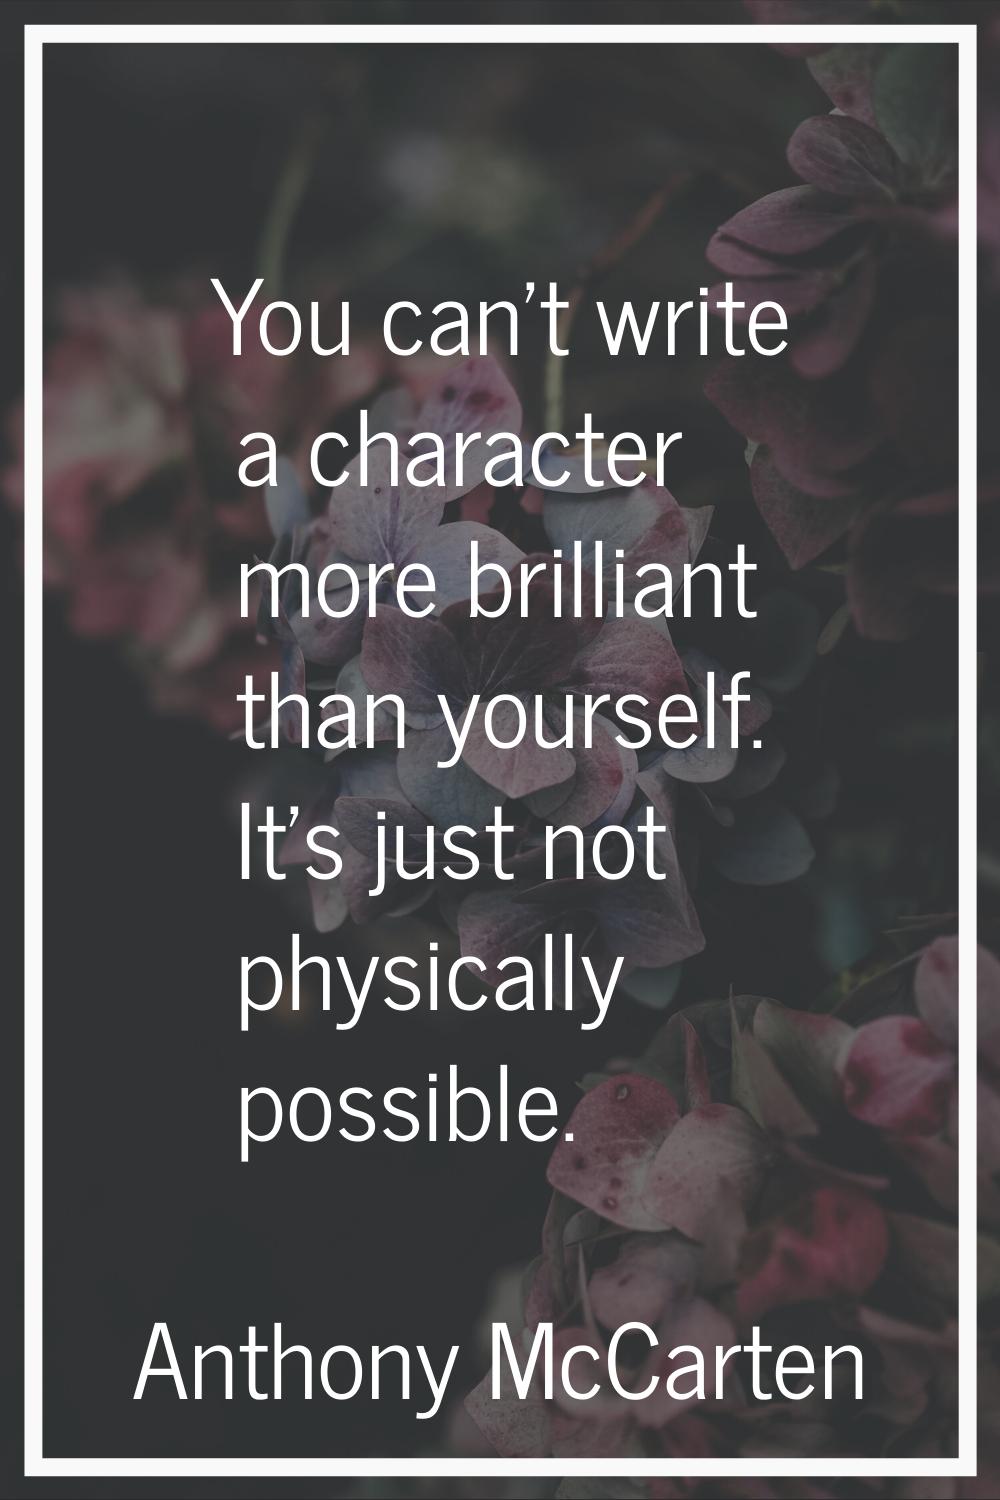 You can't write a character more brilliant than yourself. It's just not physically possible.